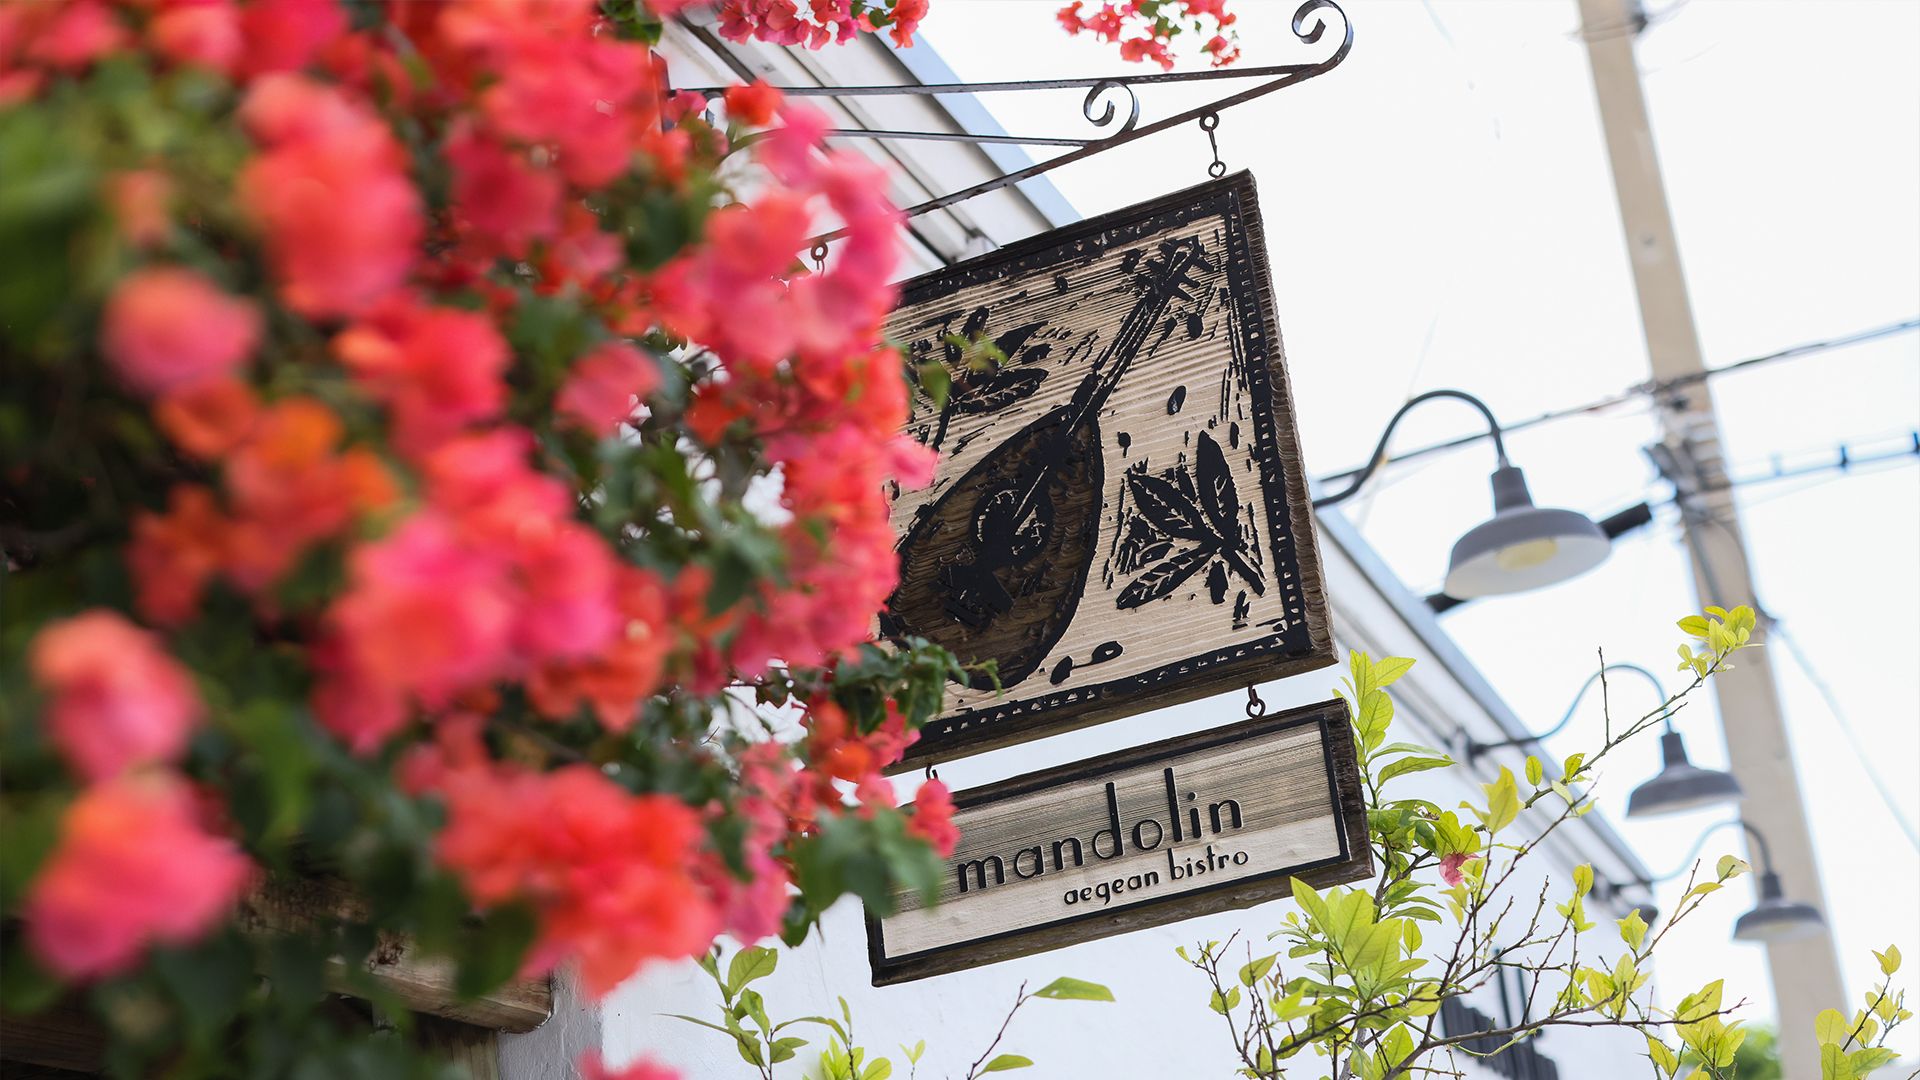 Wooden sign for Mandolin Bistro with red and pink flowers in the foreground slightly obscuring the sign